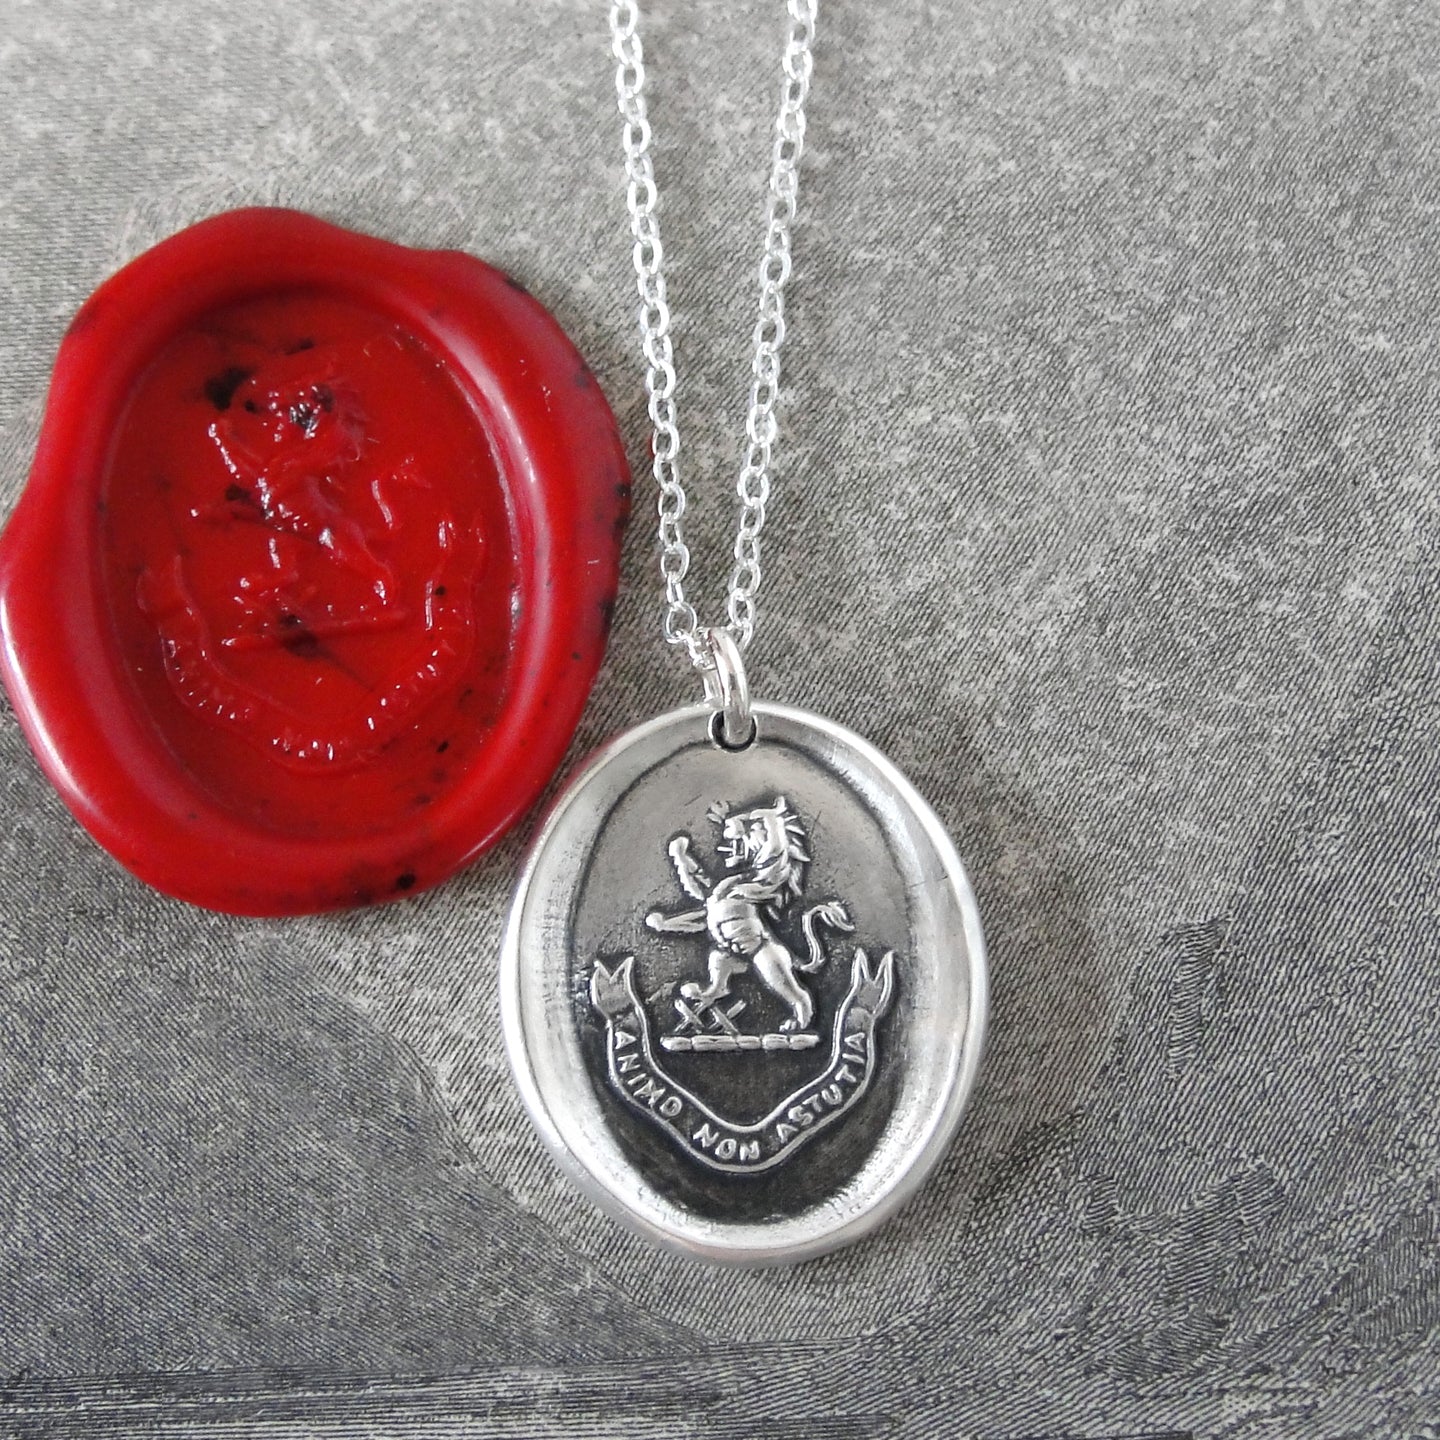 By Courage Not Stratagem - Silver Wax Seal Necklace Rampant Lion Bravery